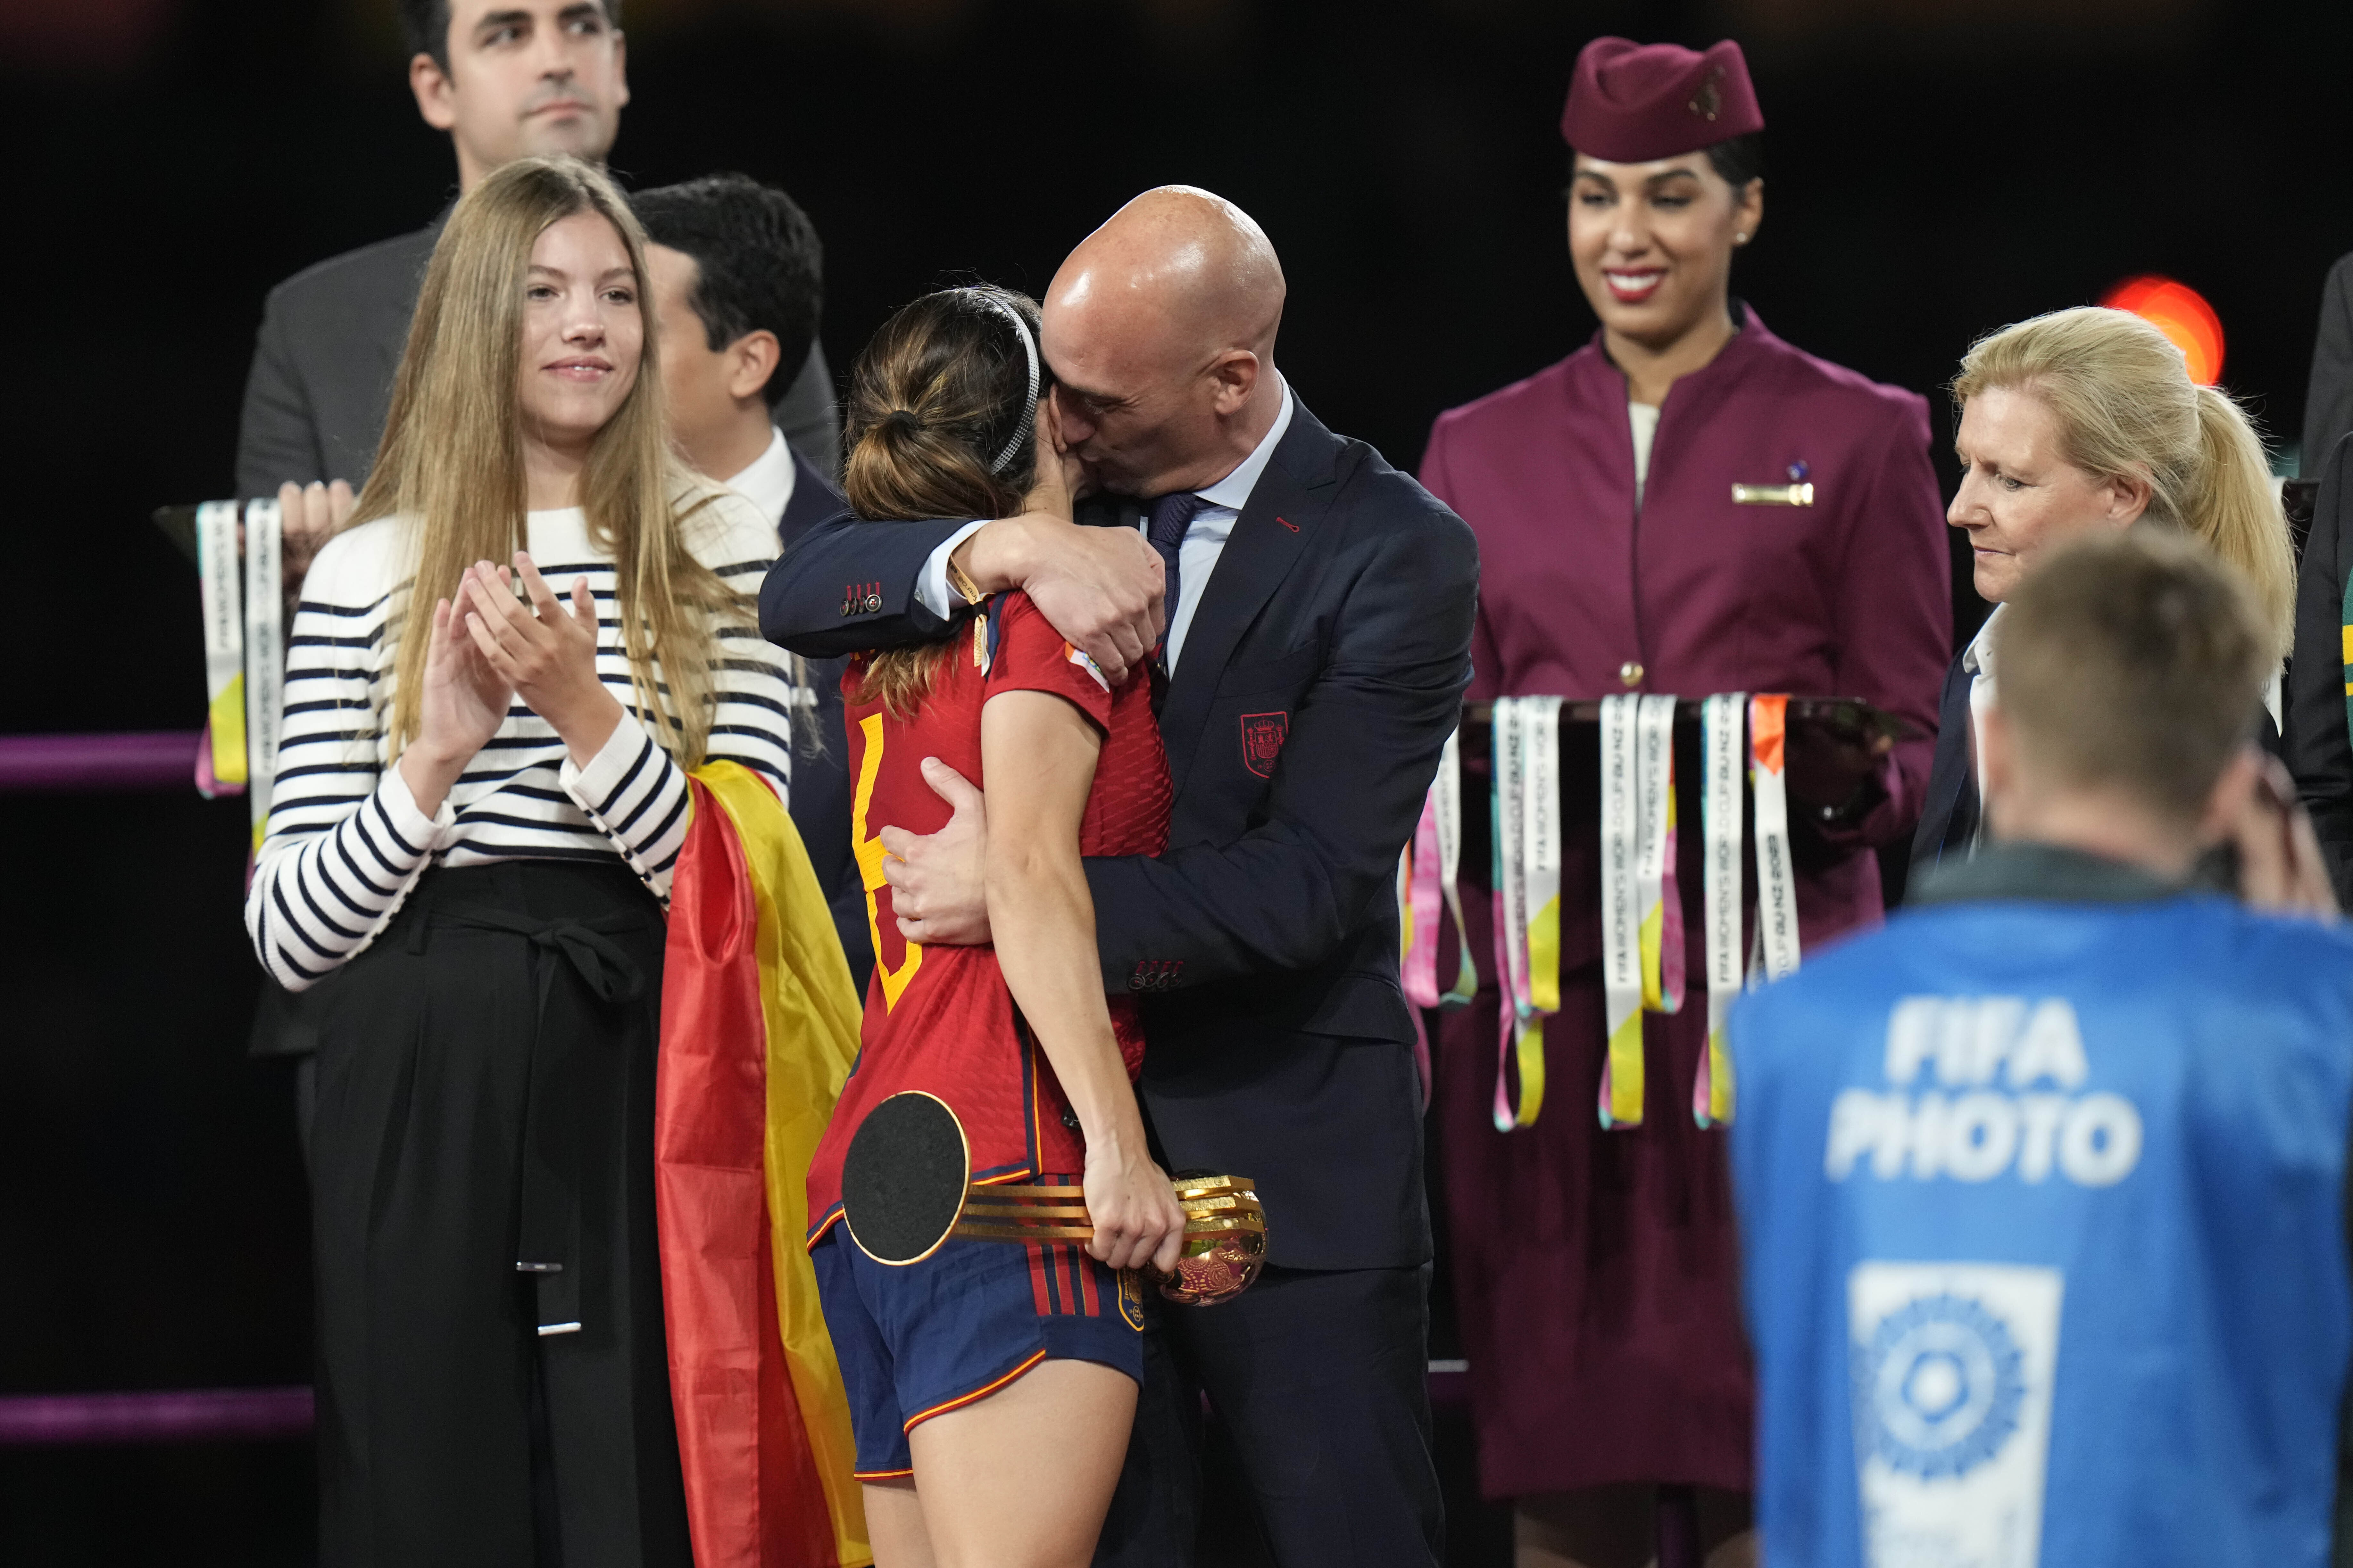 Spain has condemned inappropriate World Cup kiss. Can it now reckon with  sexism in soccer? - WHYY